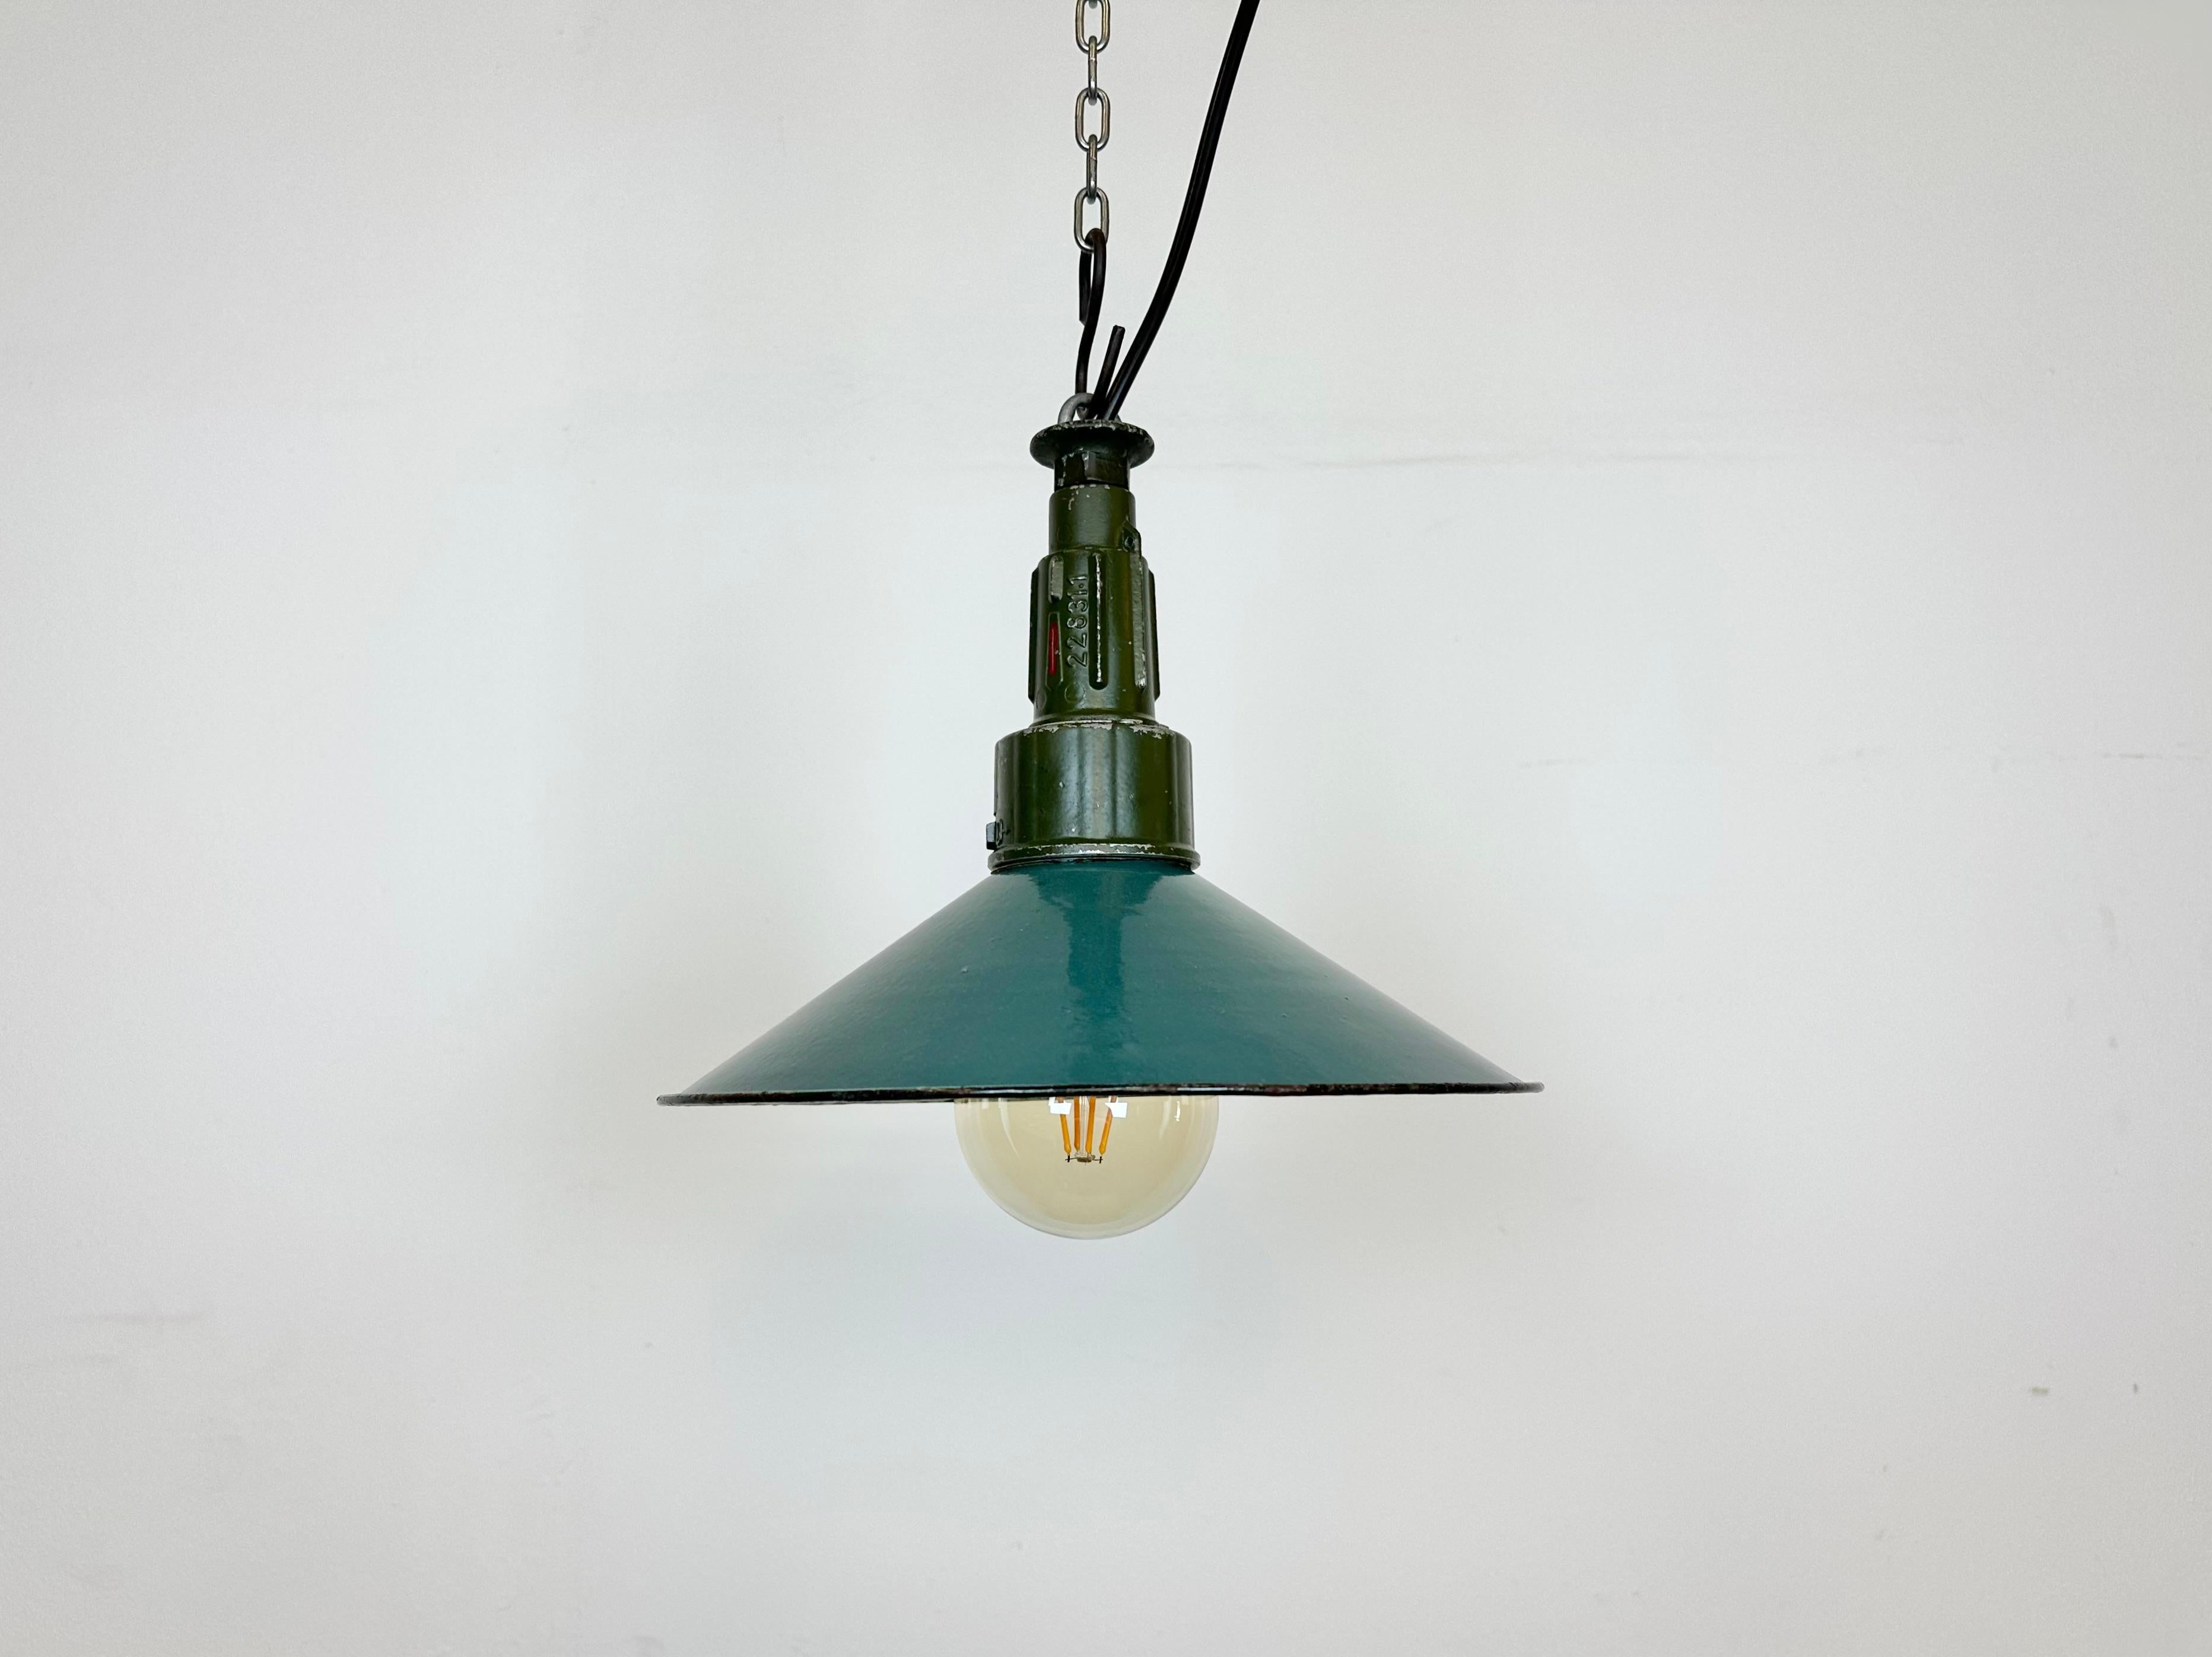 Industrial petrol enamel pendant light made in Poland during the 1960s. White enamel inside the shade. Green cast aluminium top. The socket requires standard E 27/ E26 light bulbs. New wire. The diameter of the shade is 26cm. The weight of the lamp